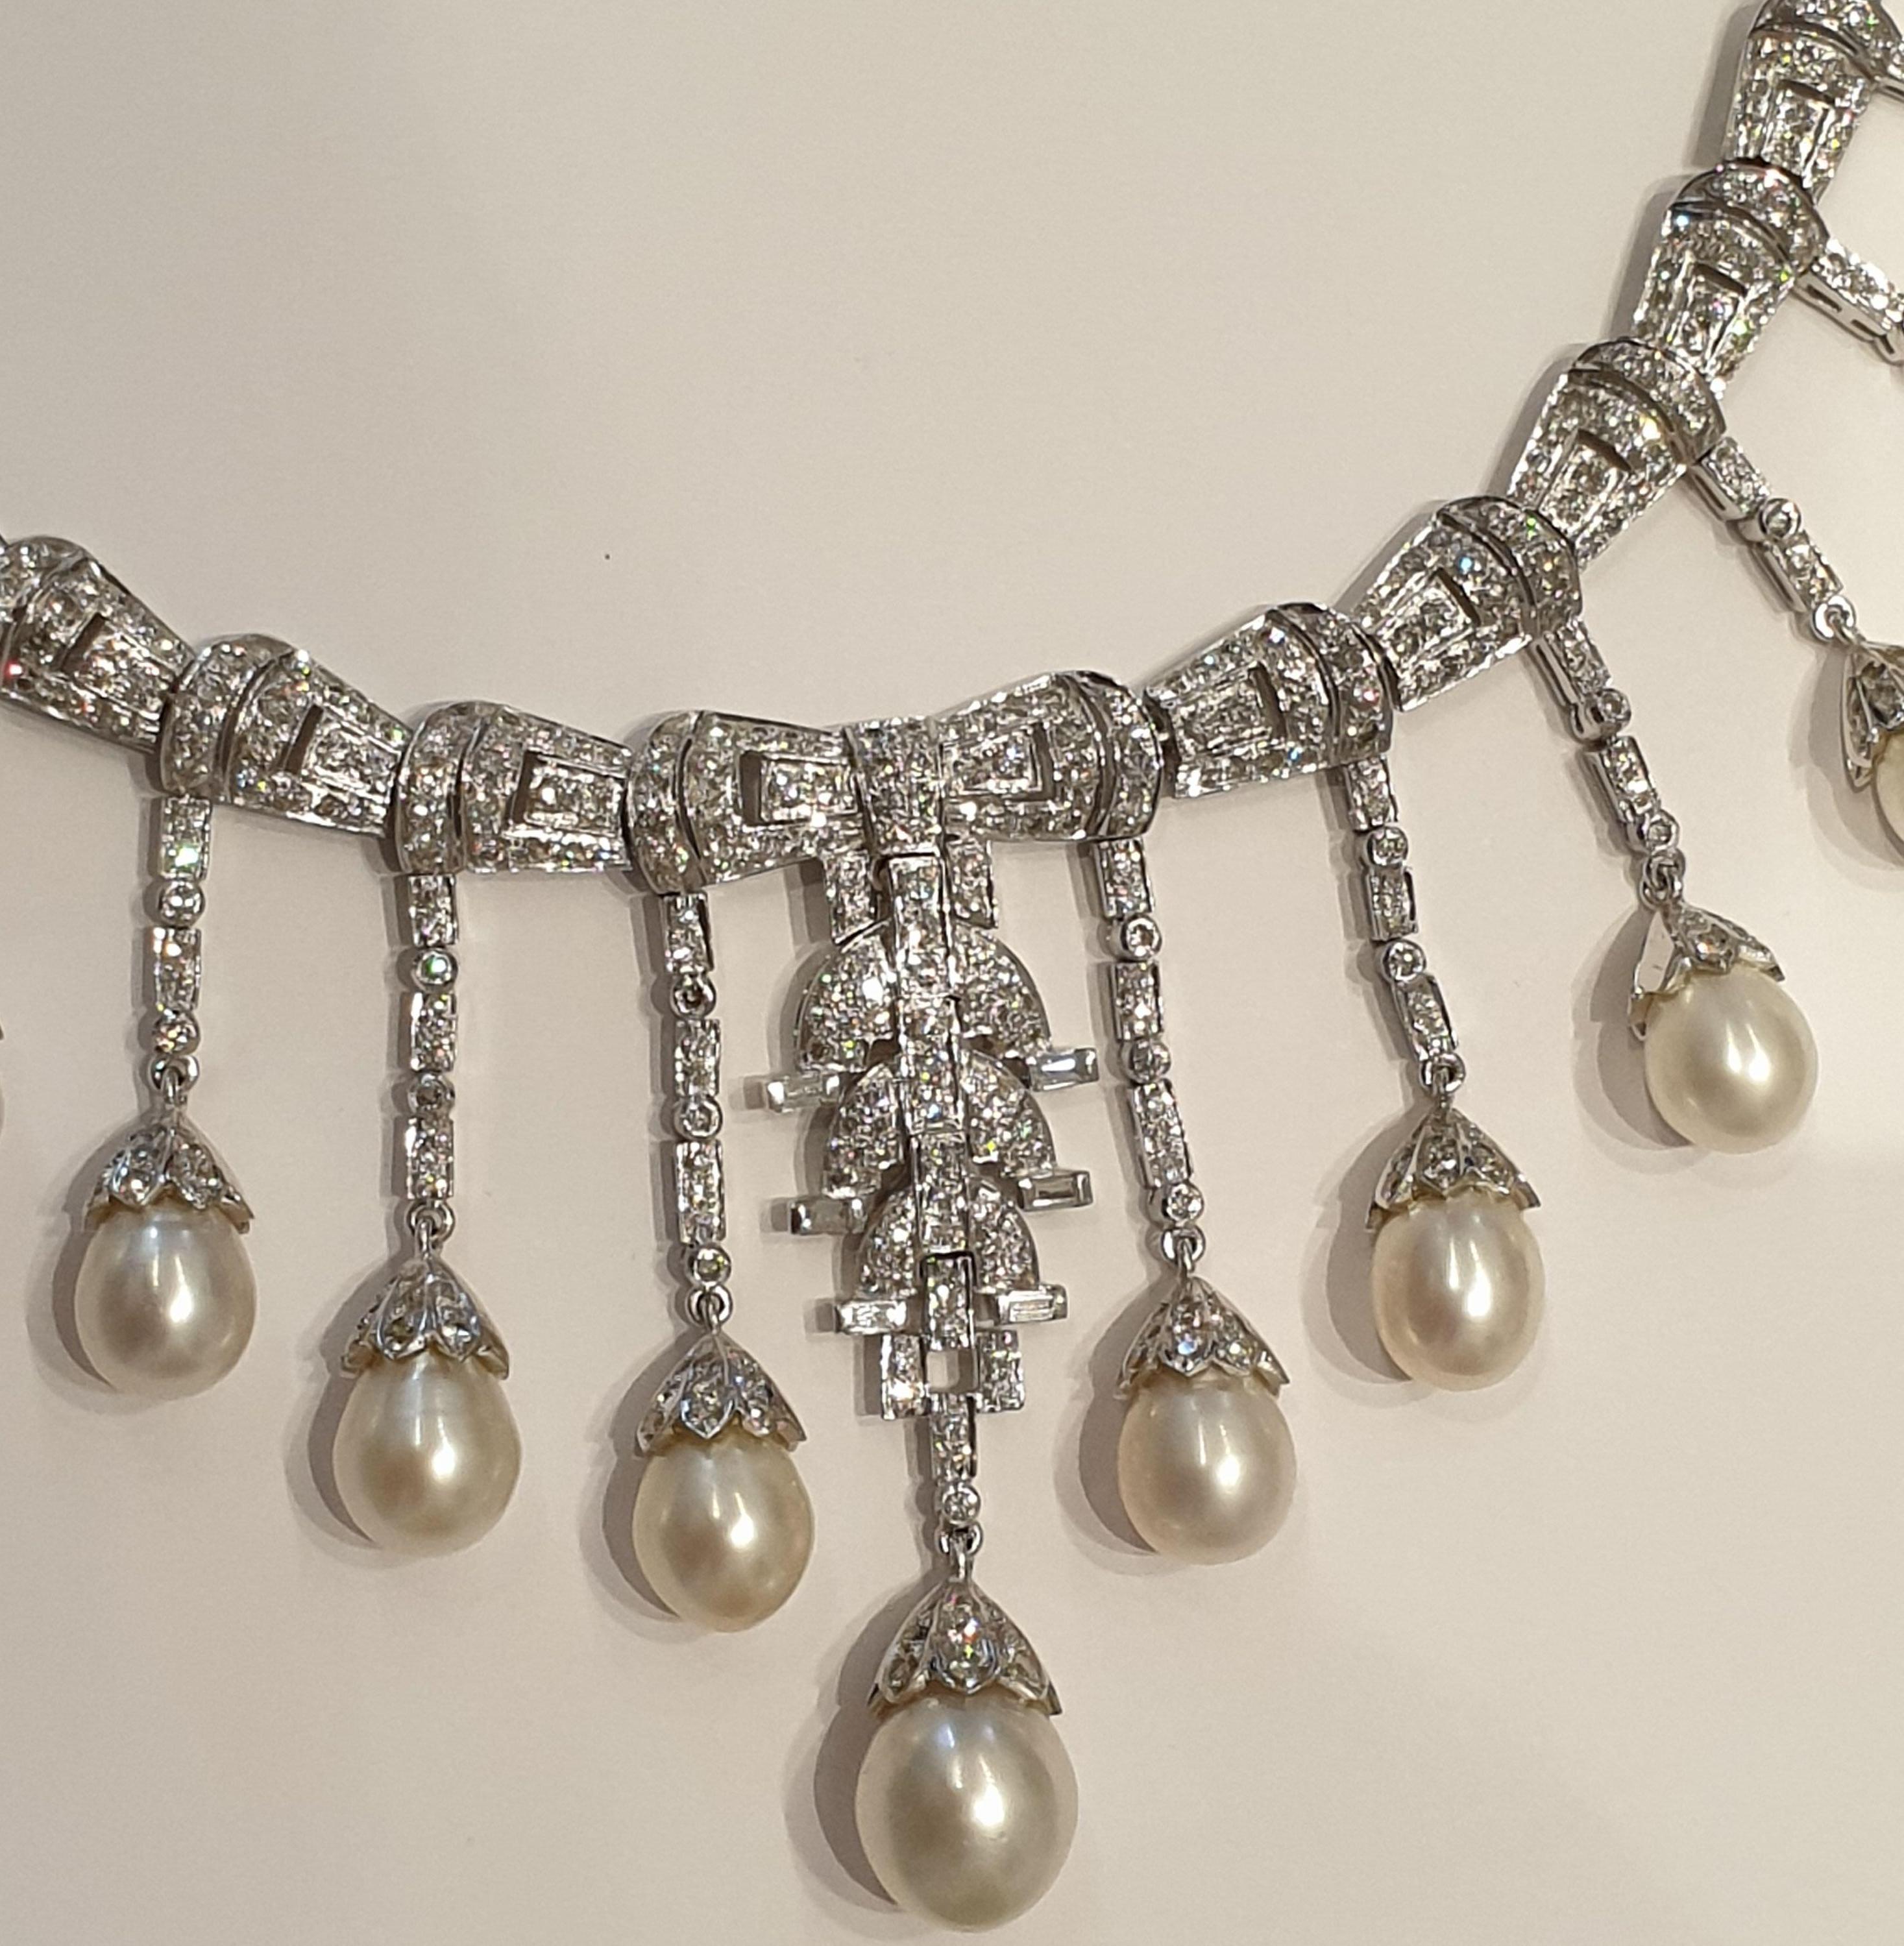 Art Deco style, Germany. Set with 325 brilliant-cut diamonds and 6 baguette-cut diamonds with a total weight of circa 16,25 ct. 17 pearls with a diameter of 7- 12mm. Mounted in 18 K white gold. Hallmarked with the purity 750 on the clasp. Weight: